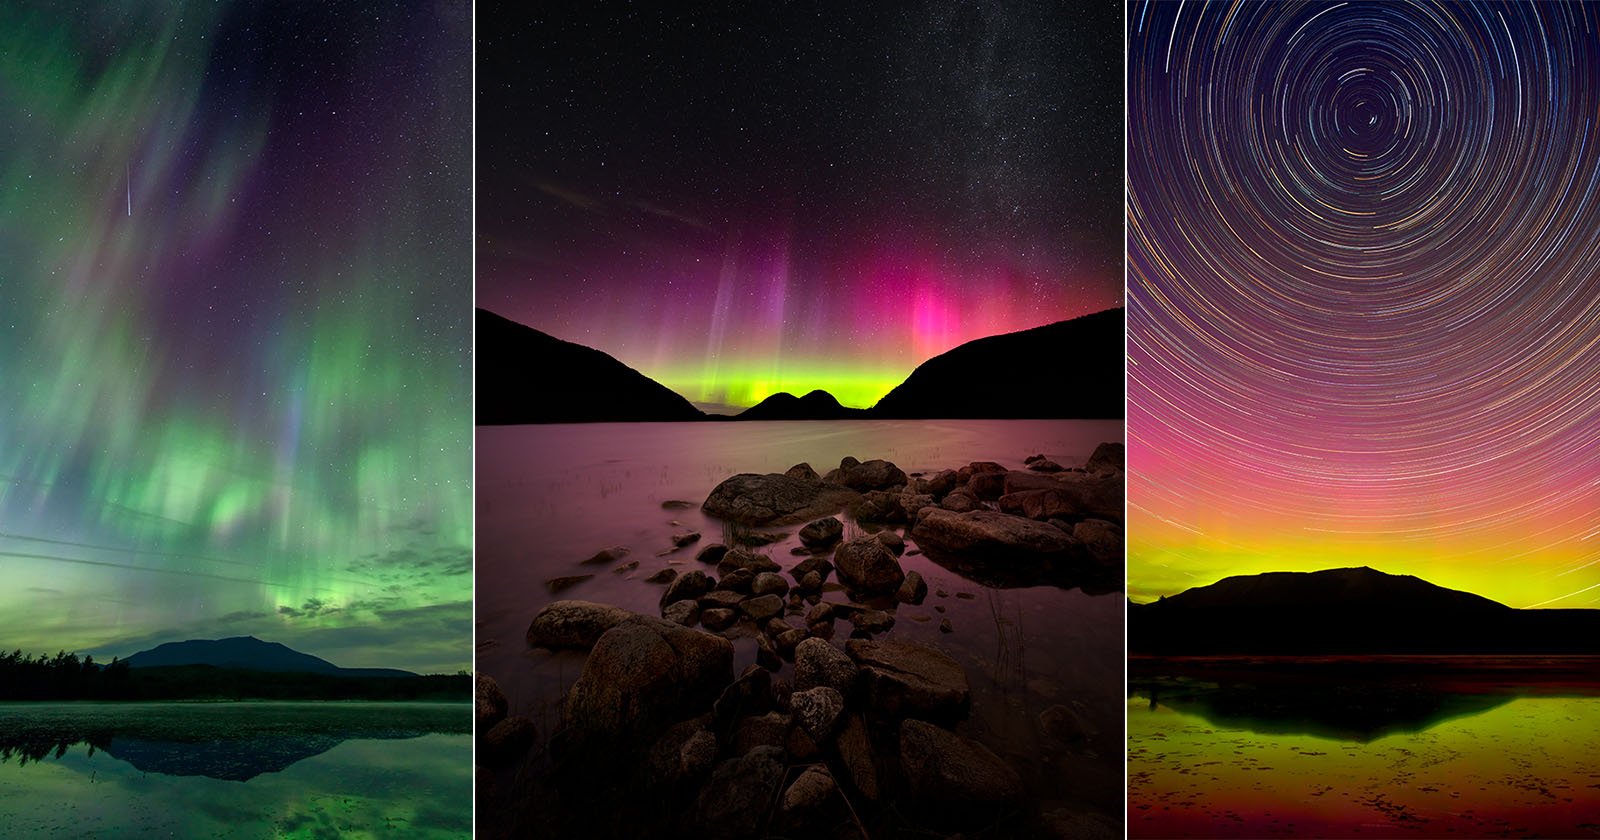 Colorful Auroras Could Appear Tonight in U.S. as Solar Storm Races to Earth